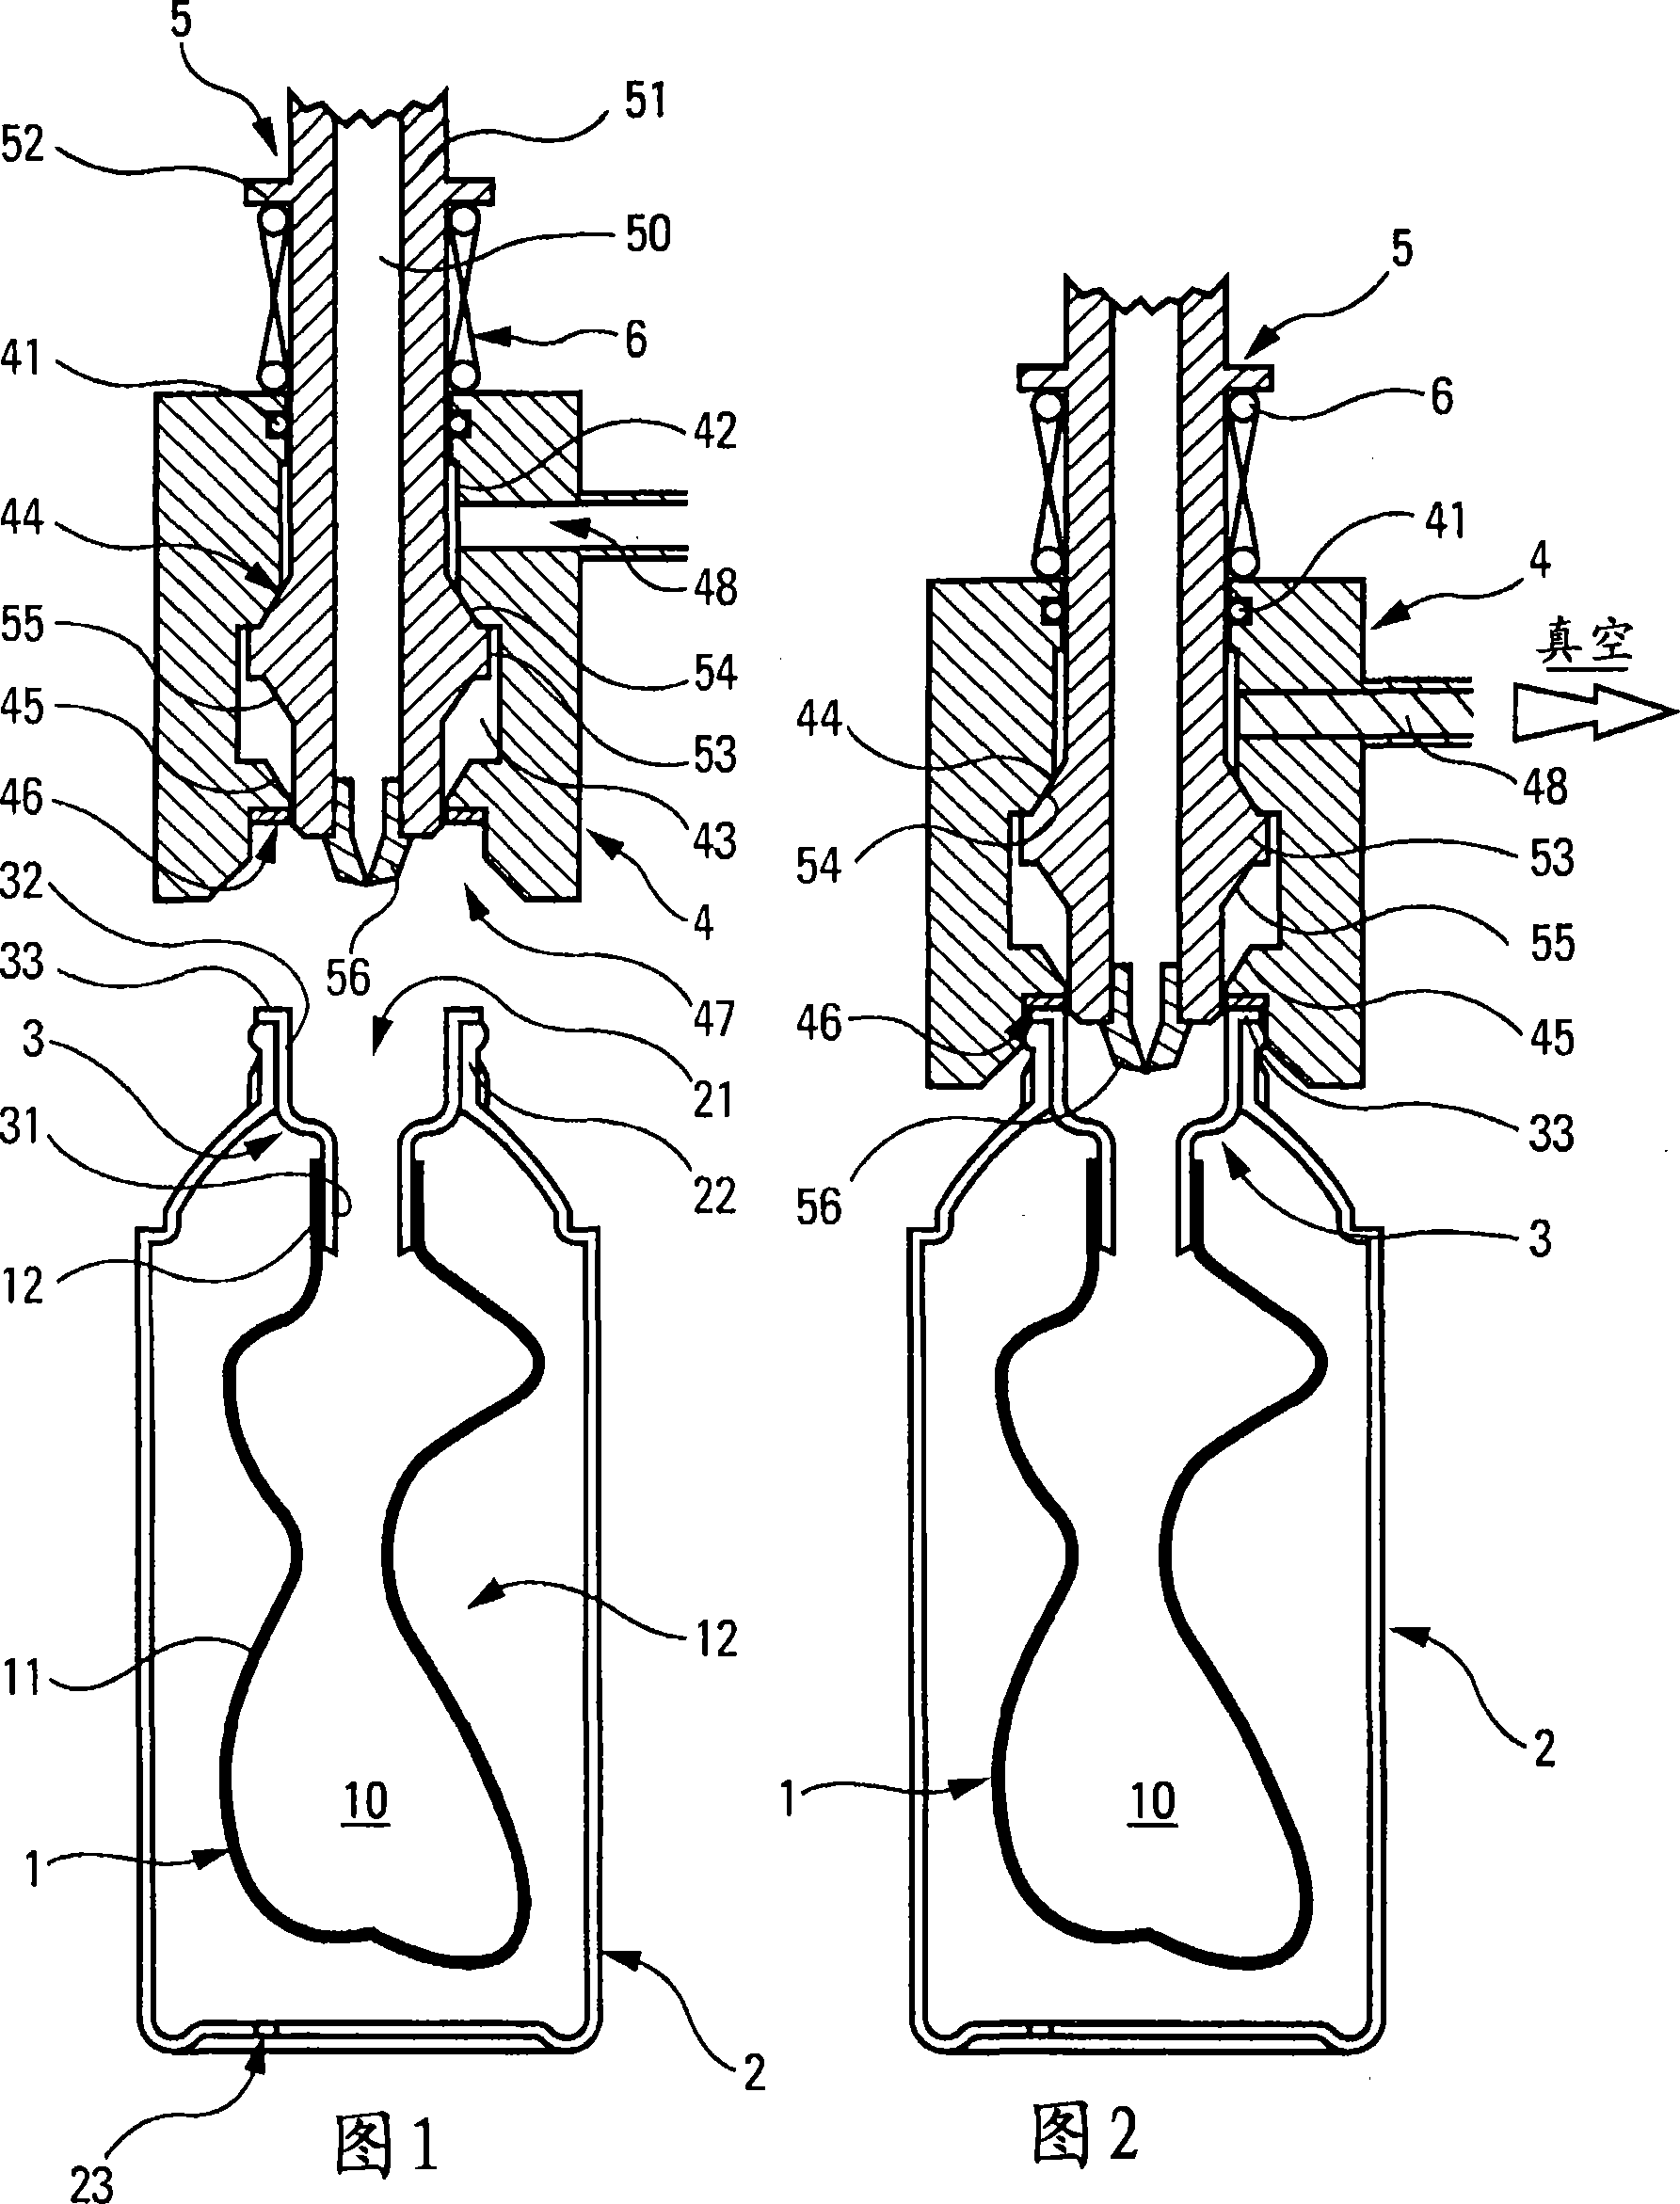 Method for filling and device for filling a reservoir of variable useful volume